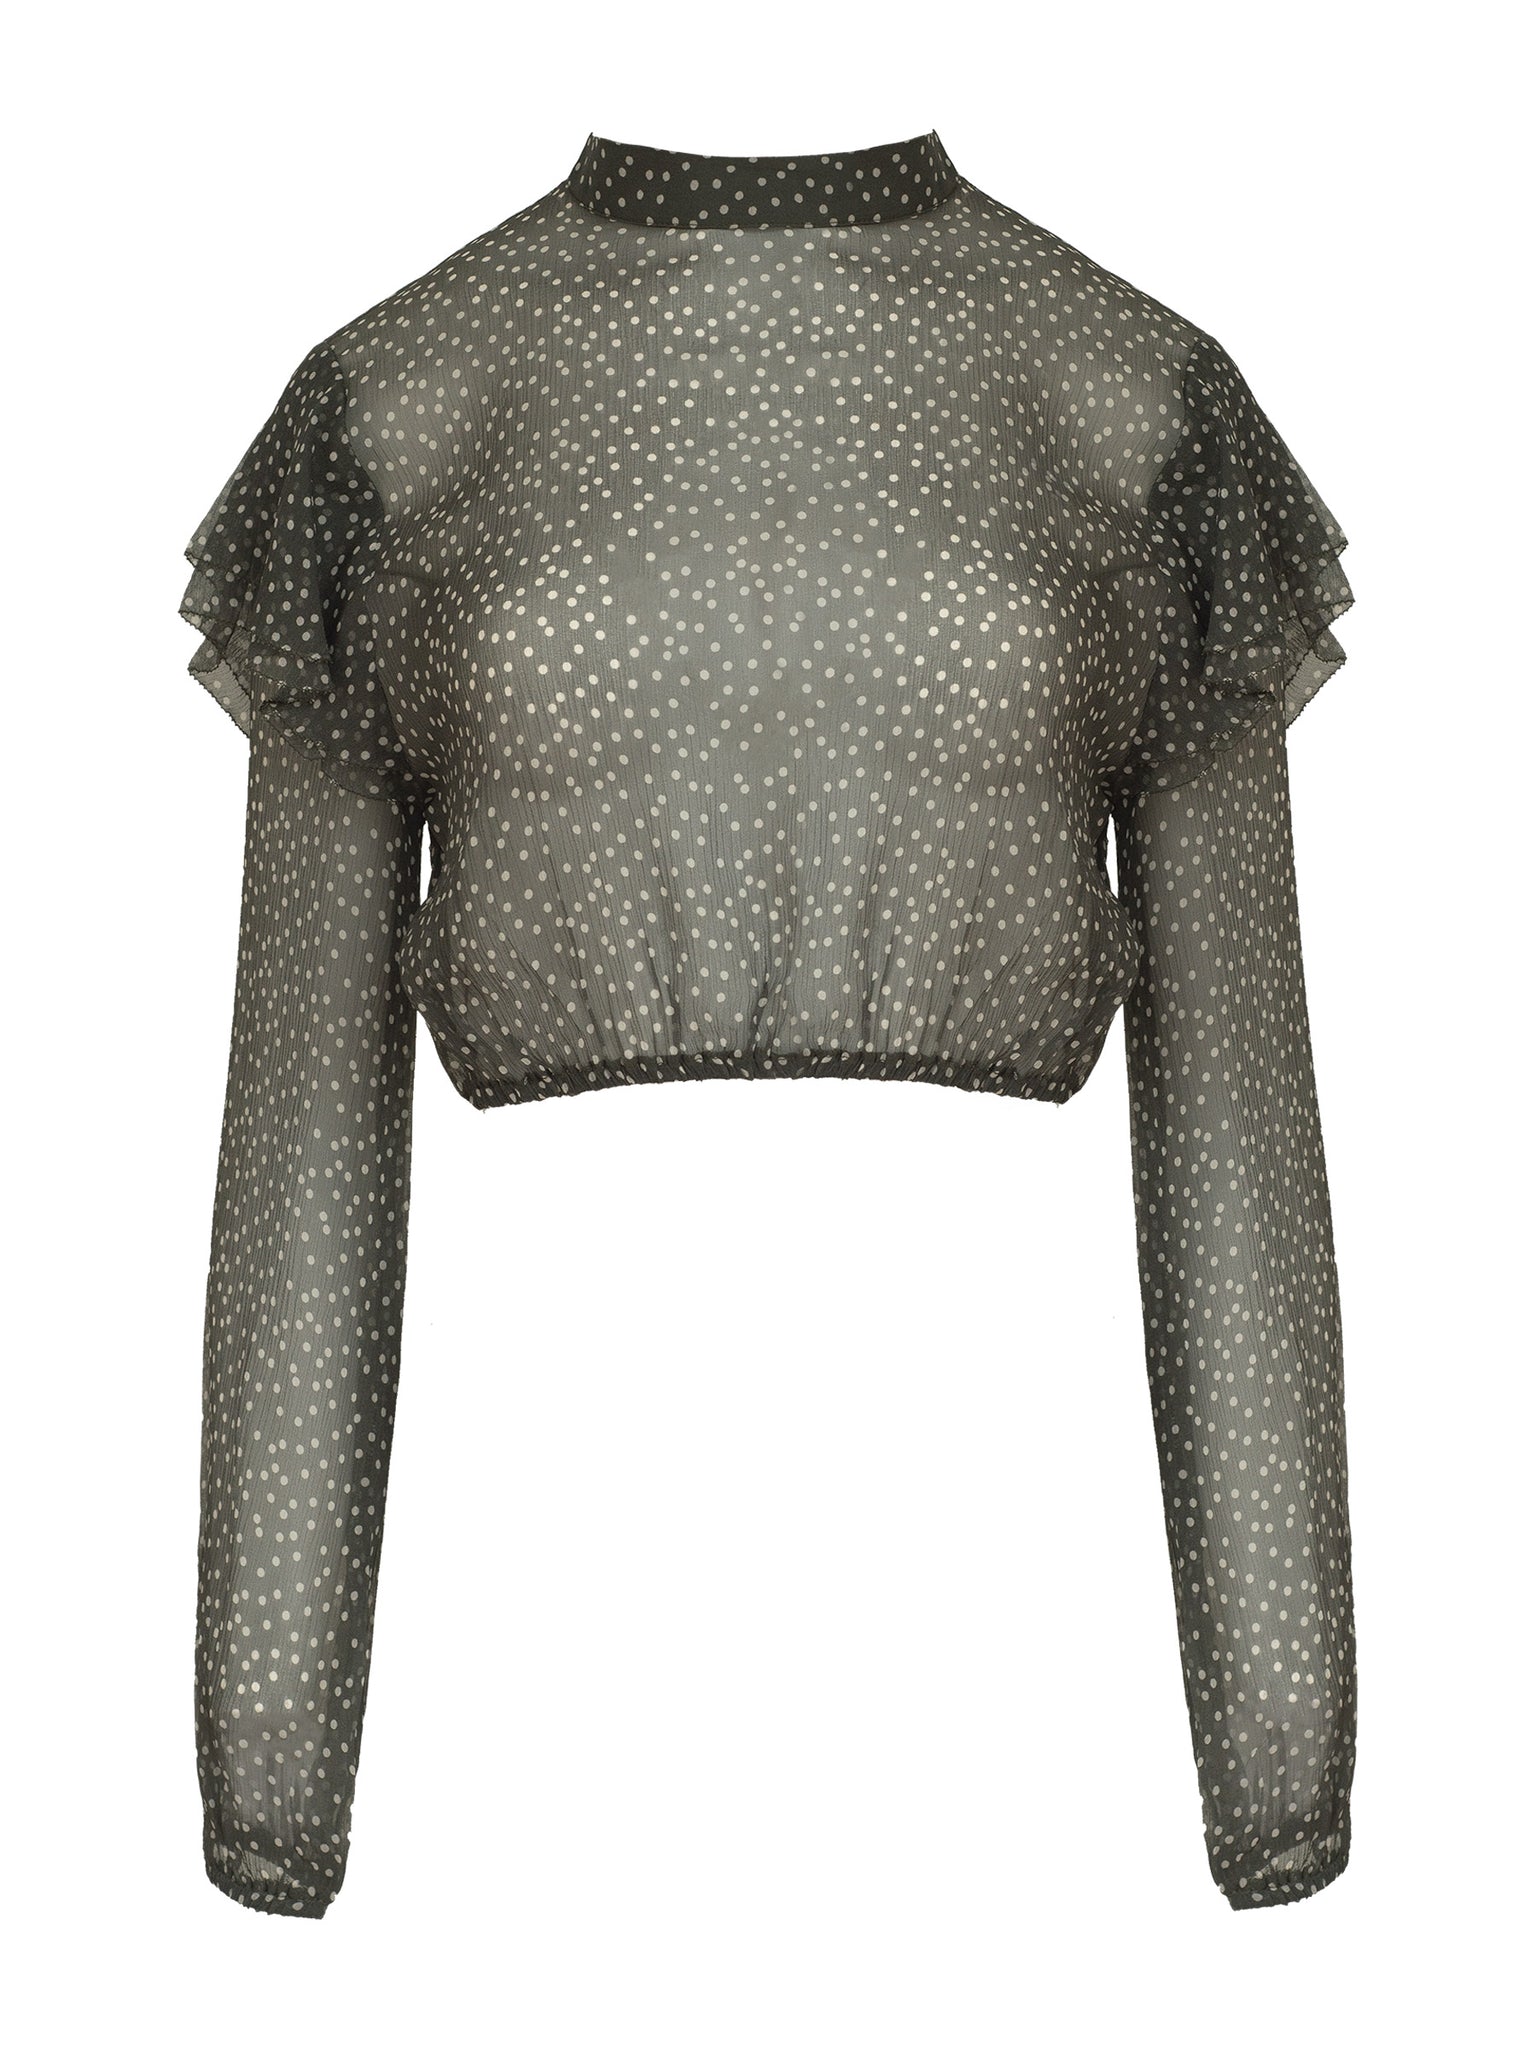 SIR The Label | Isabella Ruffle Top in Olive Polka Dot | The UNDONE by SIR.